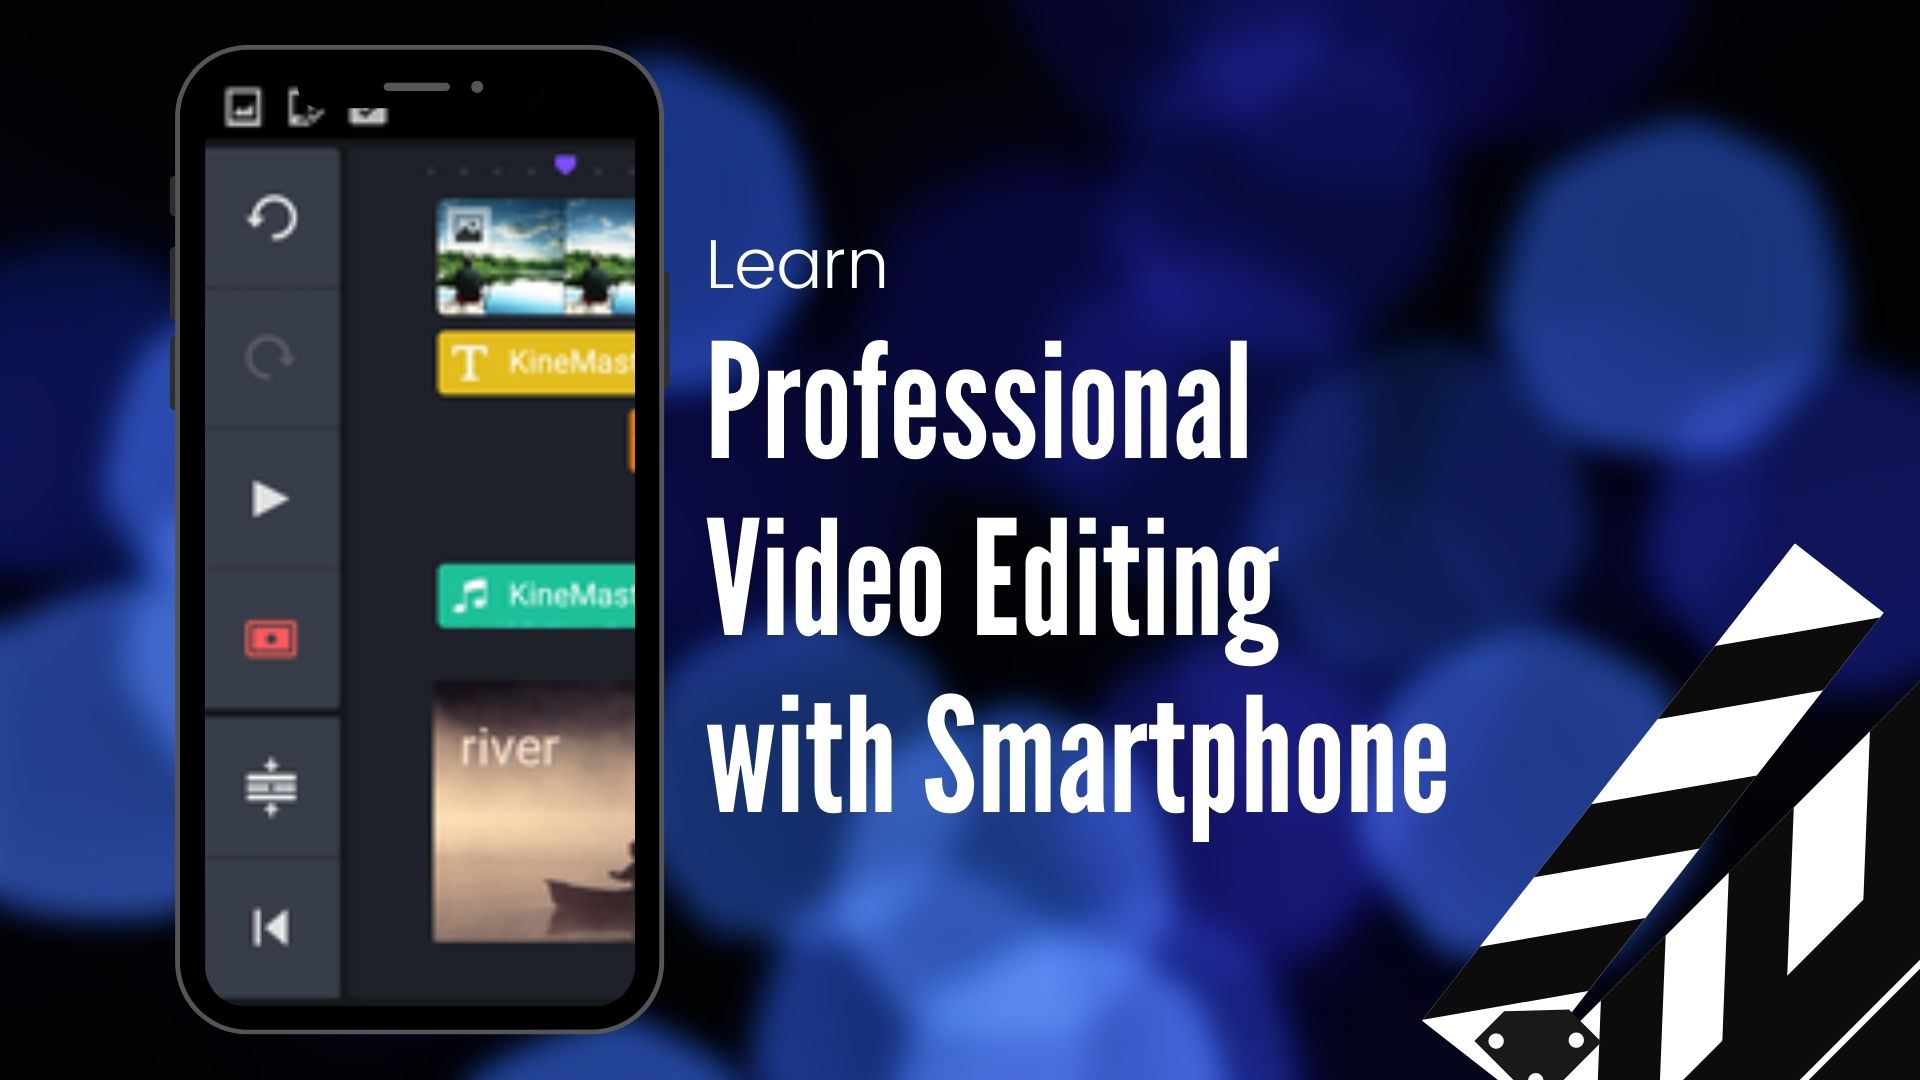 Professional Video Editing with Smartphone